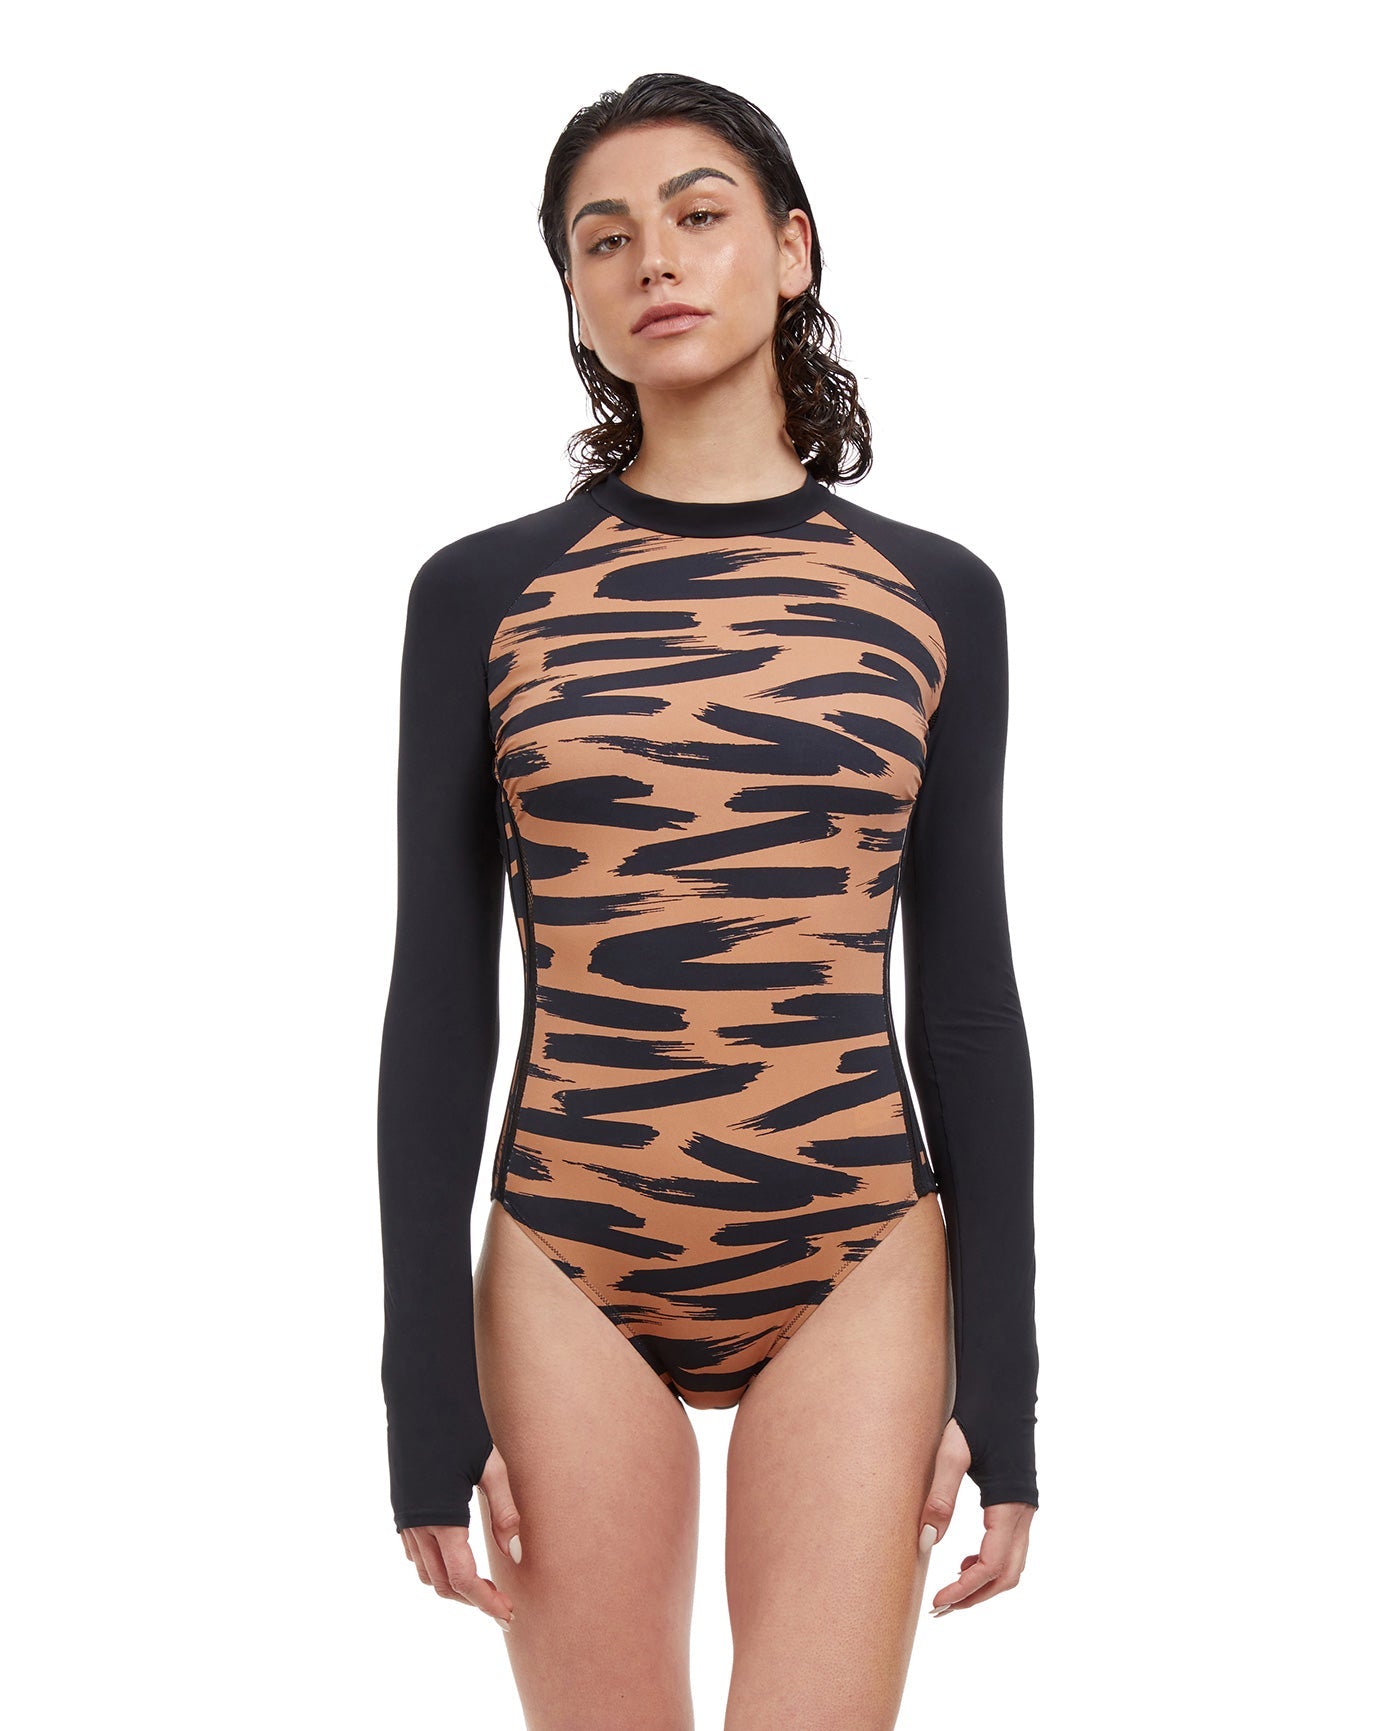 Front View Of Free Sport Upstream Long Sleeve High Neck Rash Guard One Piece Swimsuit | FREE SPORT UPSTREAM CARAMEL